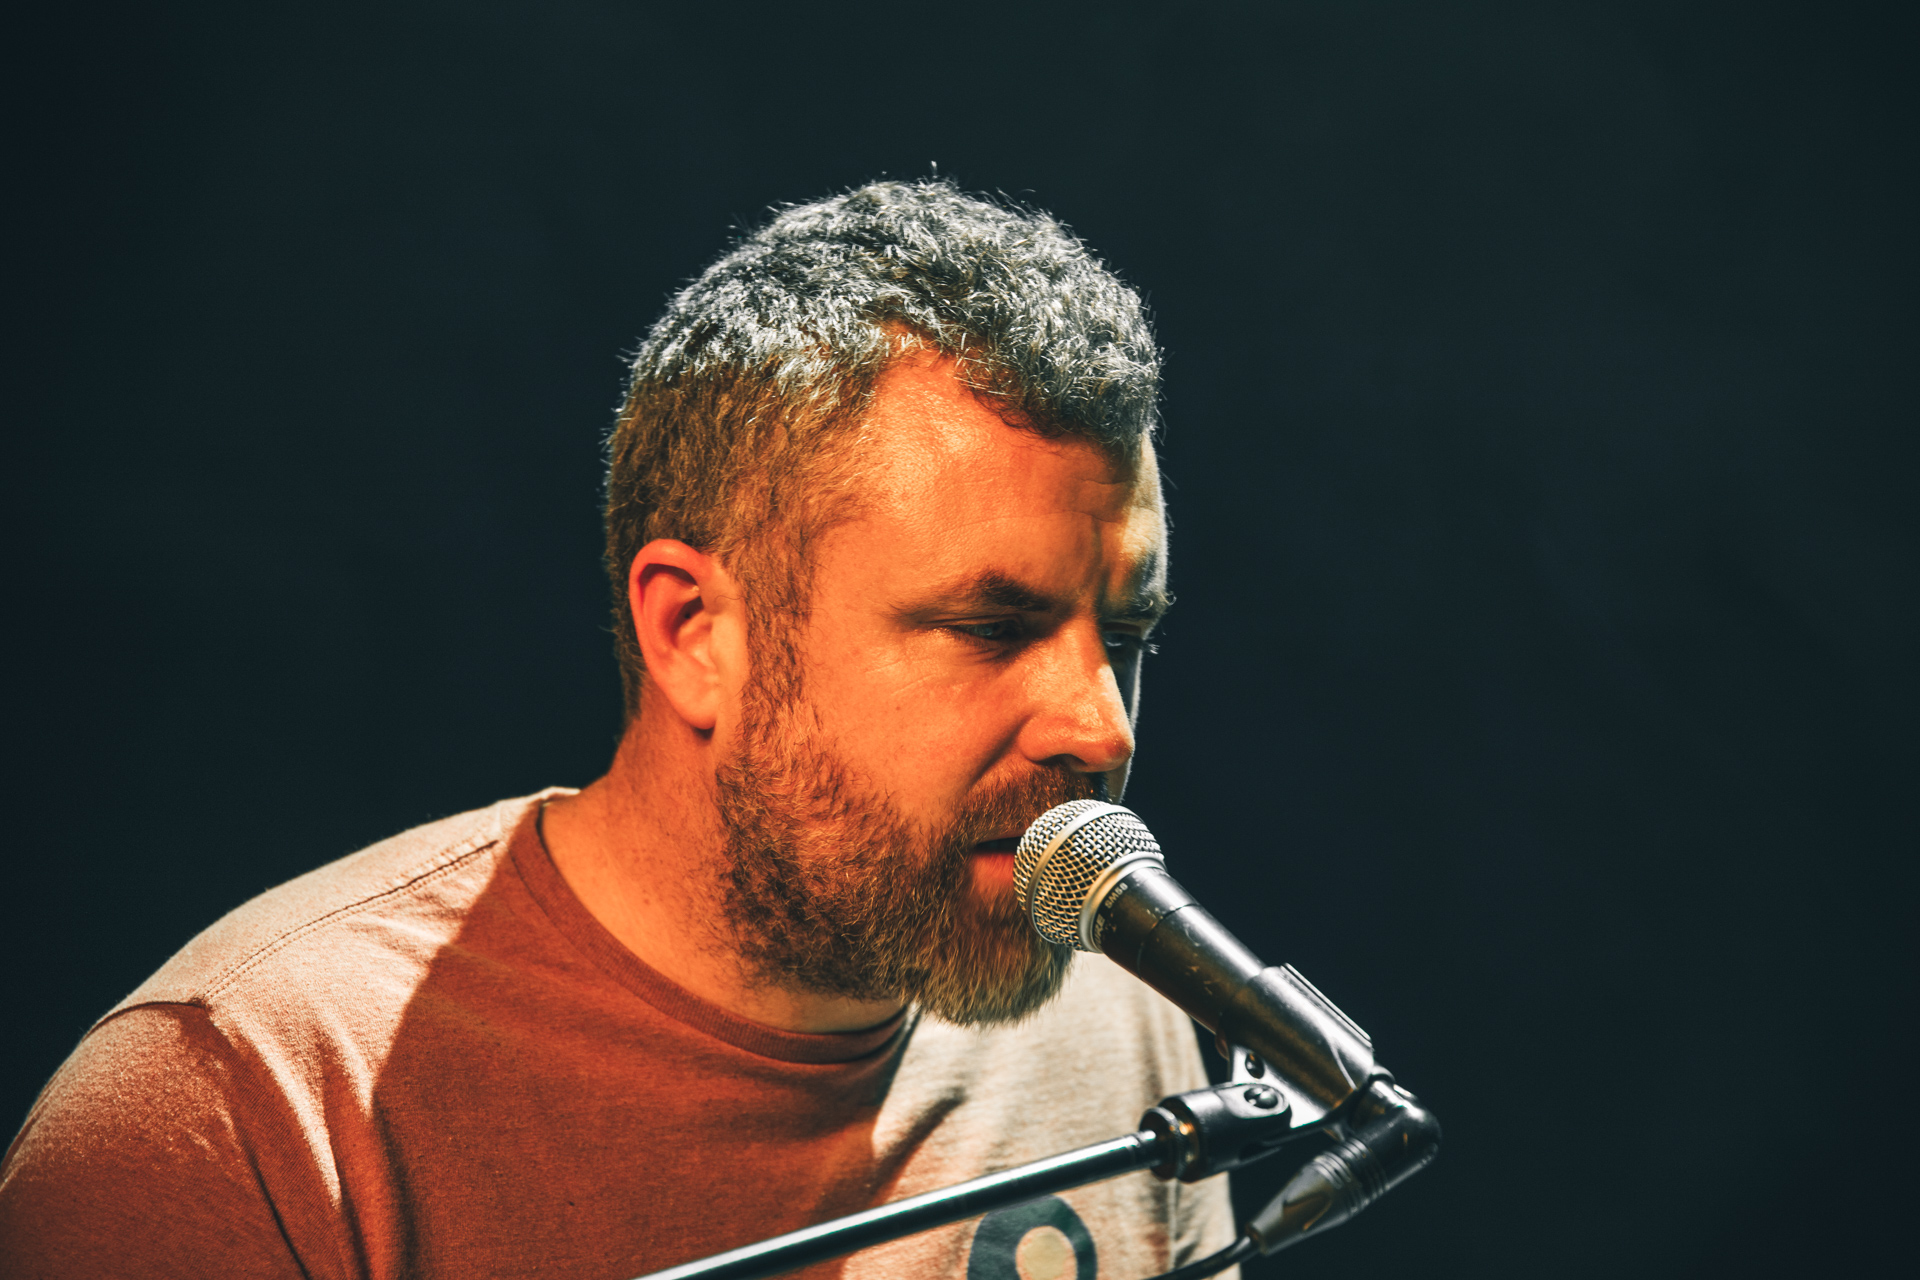 Mick Flannery Photo by Matthijs van der Ven for The Influences 5108